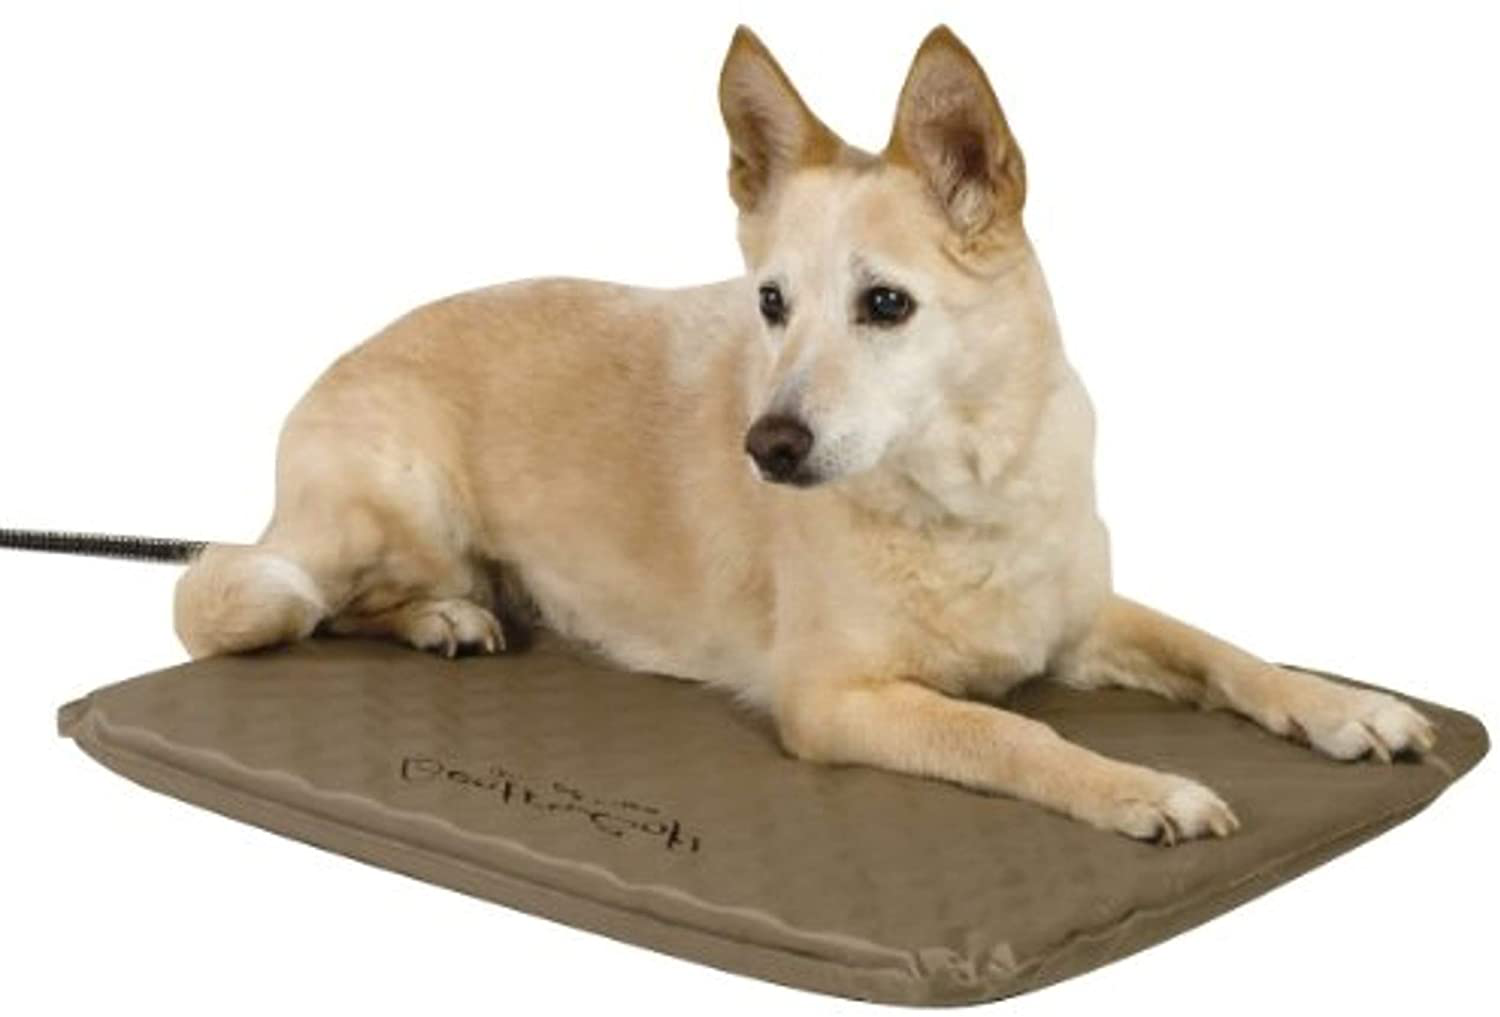 K&H Pet Products Lectro-Soft Outdoor Heated Pet Bed Animals & Pet Supplies > Pet Supplies > Dog Supplies > Dog Houses K&H PET PRODUCTS Retail Box Medium (19 x 24 in) 